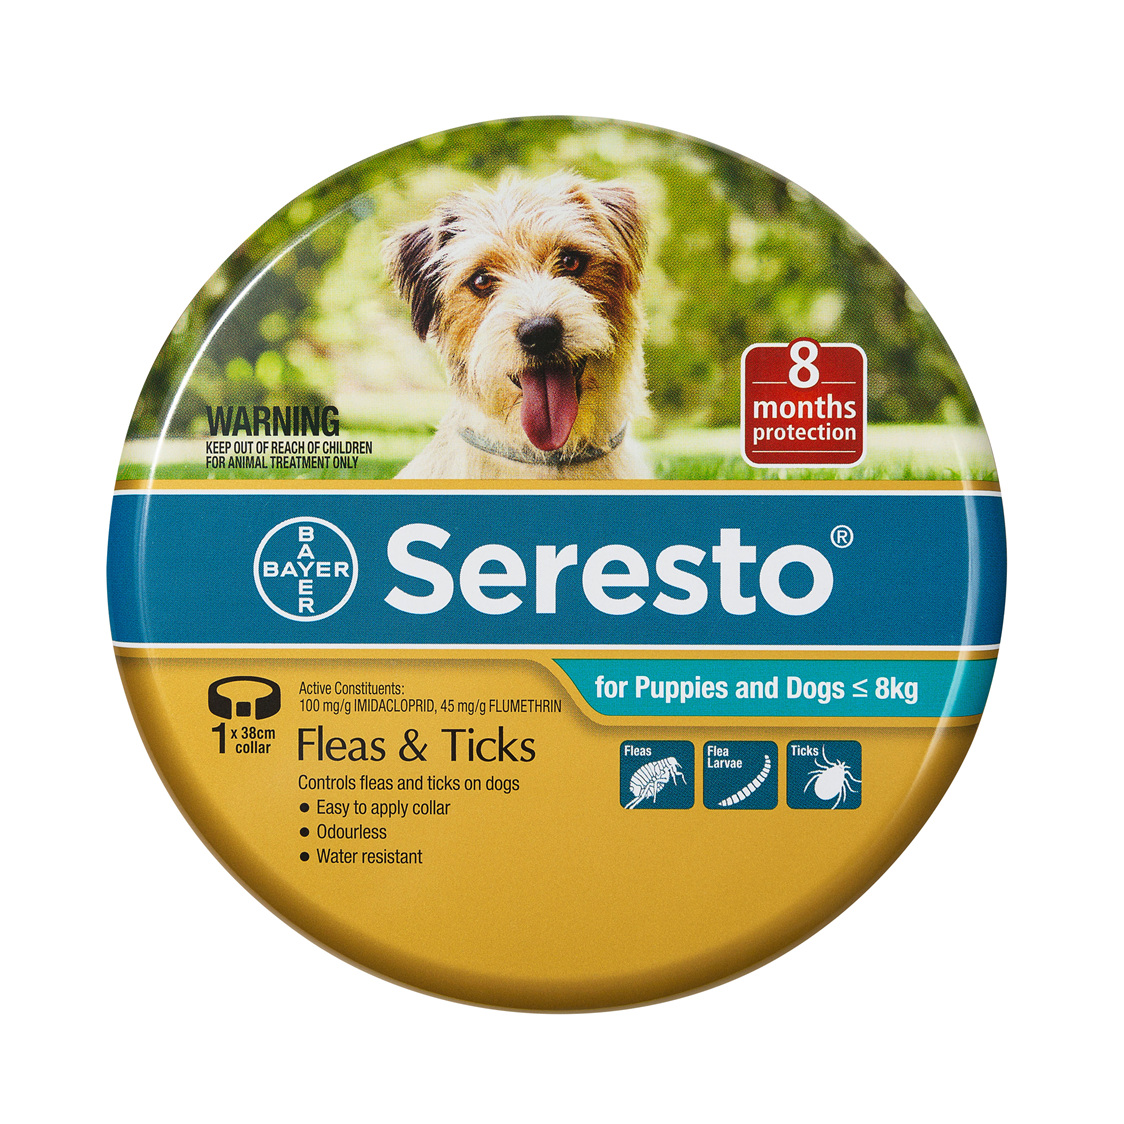 seresto-flea-tick-collar-for-puppies-and-dogs-less-than-8kg-kamo